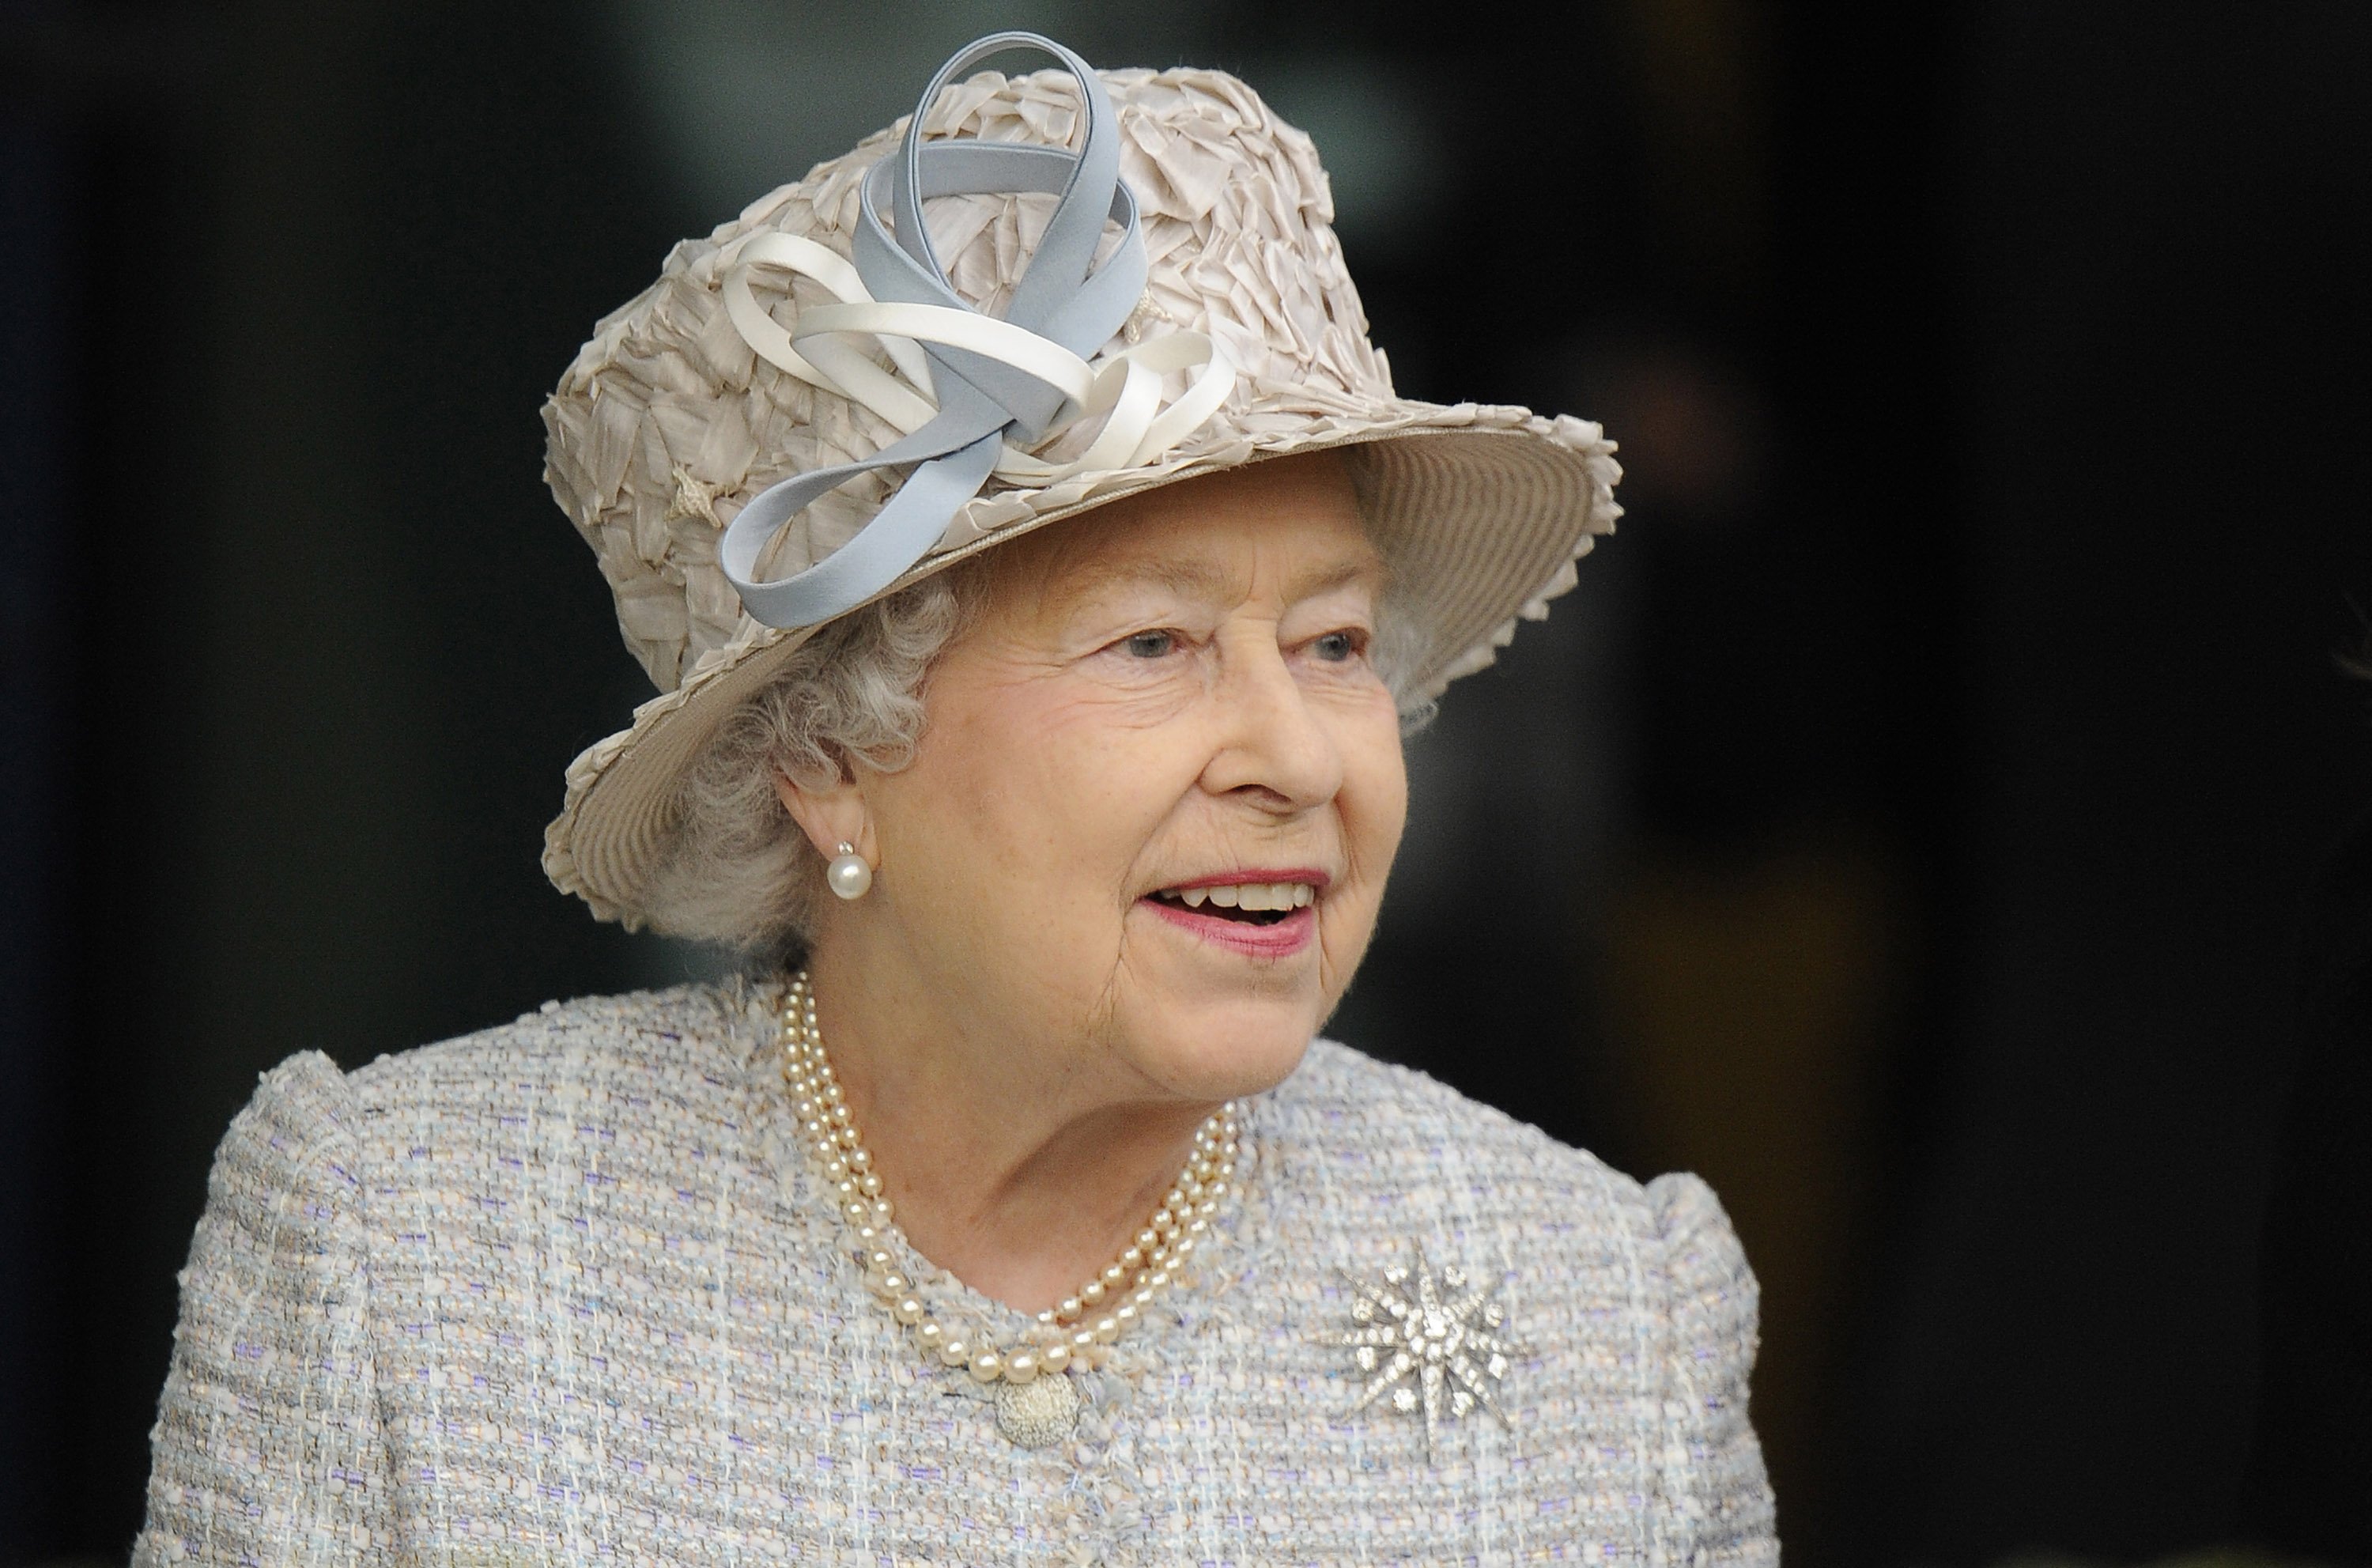 Queen Elizabeth attends Ascot racecourse on October 20, 2012 in Ascot, England. | Photo: Getty Images